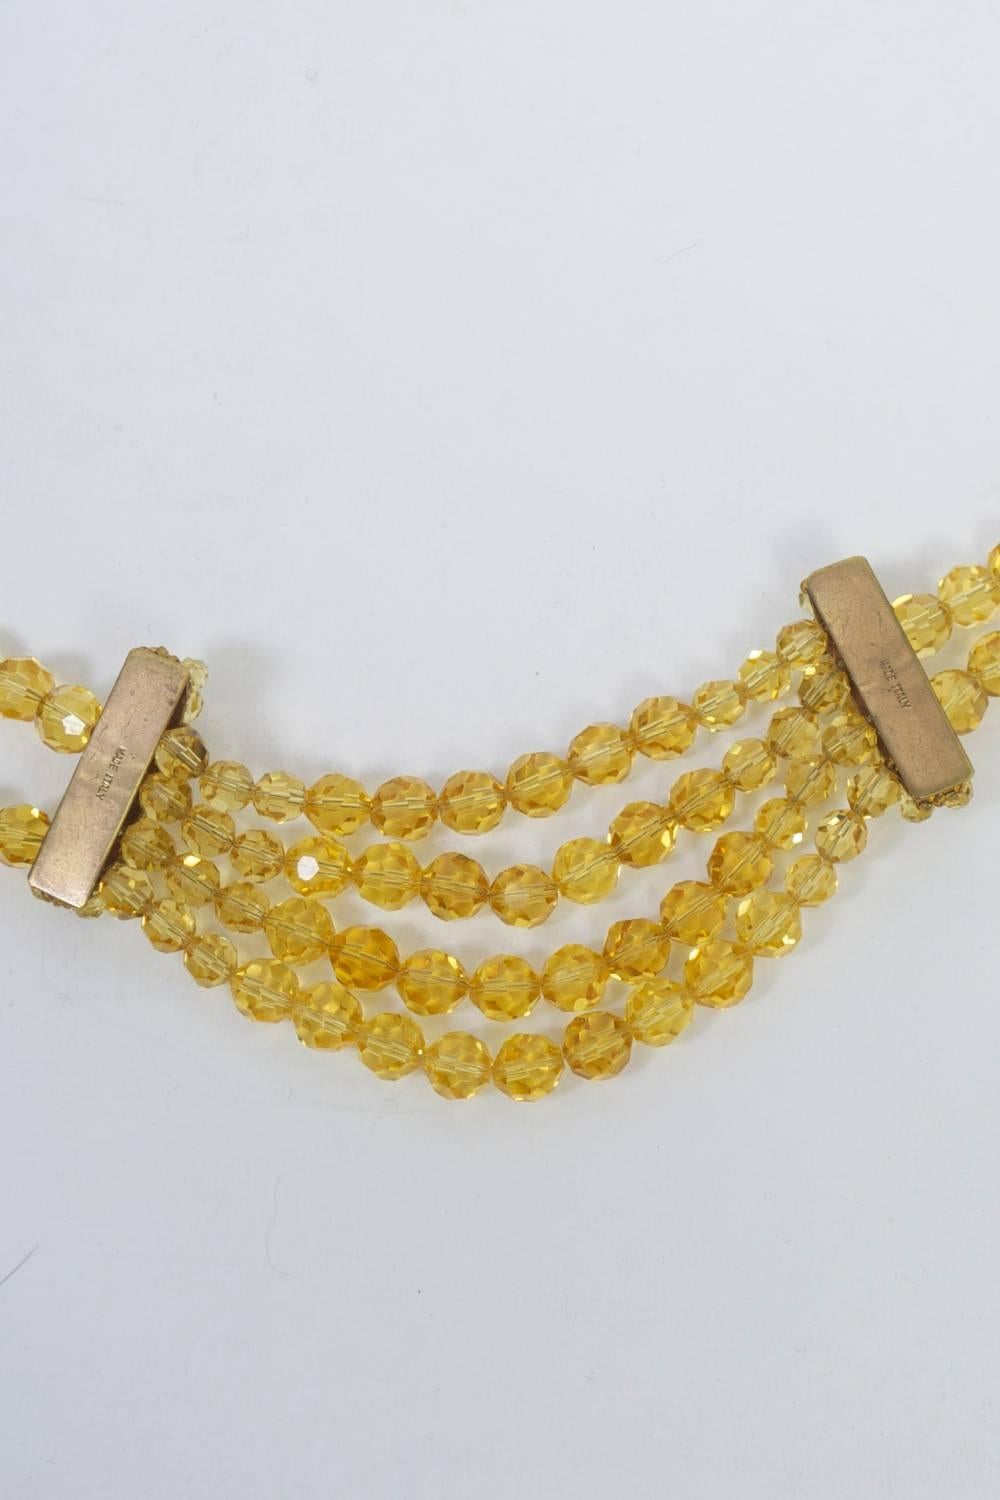 Women's Yellow Crystal Necklace, Coppola e Toppo? For Sale